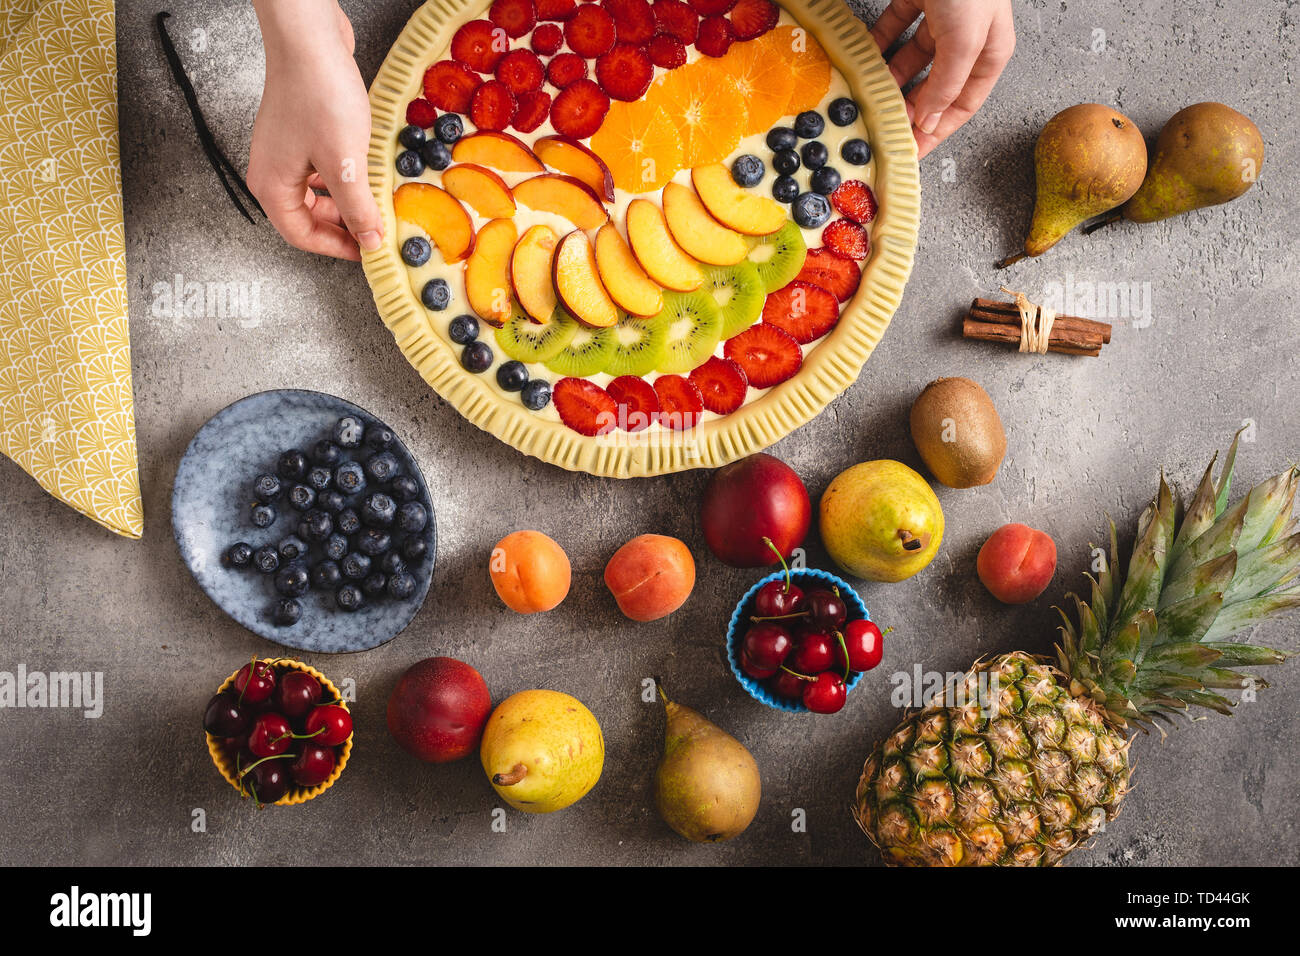 Female Hands Prepare Tart Pie with Fresh Dough and Colorful Organic Fruits Stock Photo